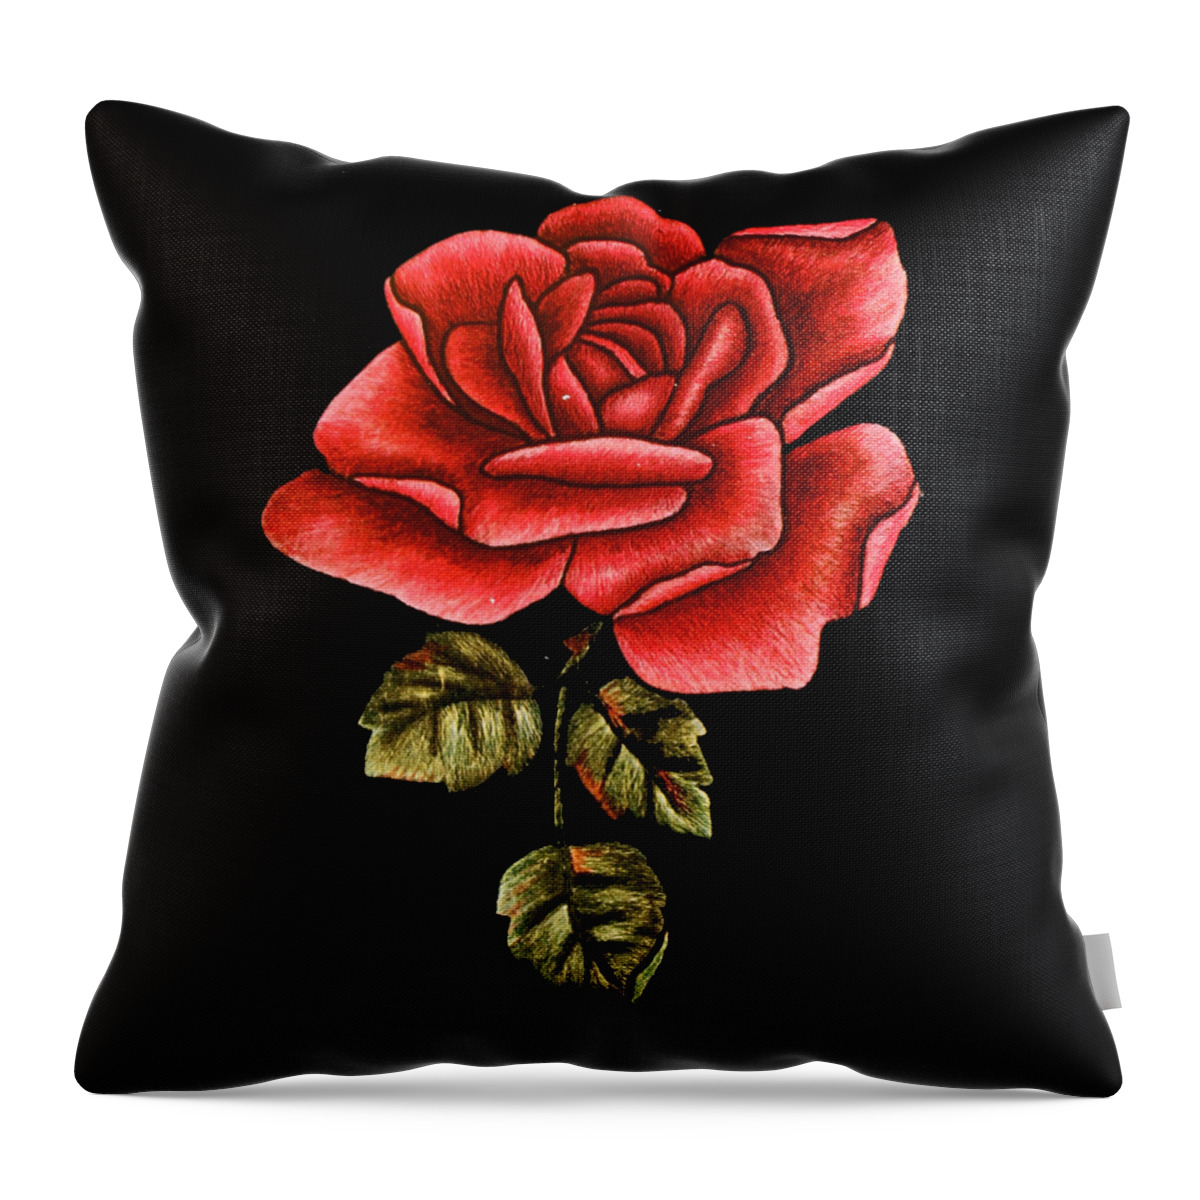 Funny Throw Pillow featuring the digital art Retro Rose by Flippin Sweet Gear